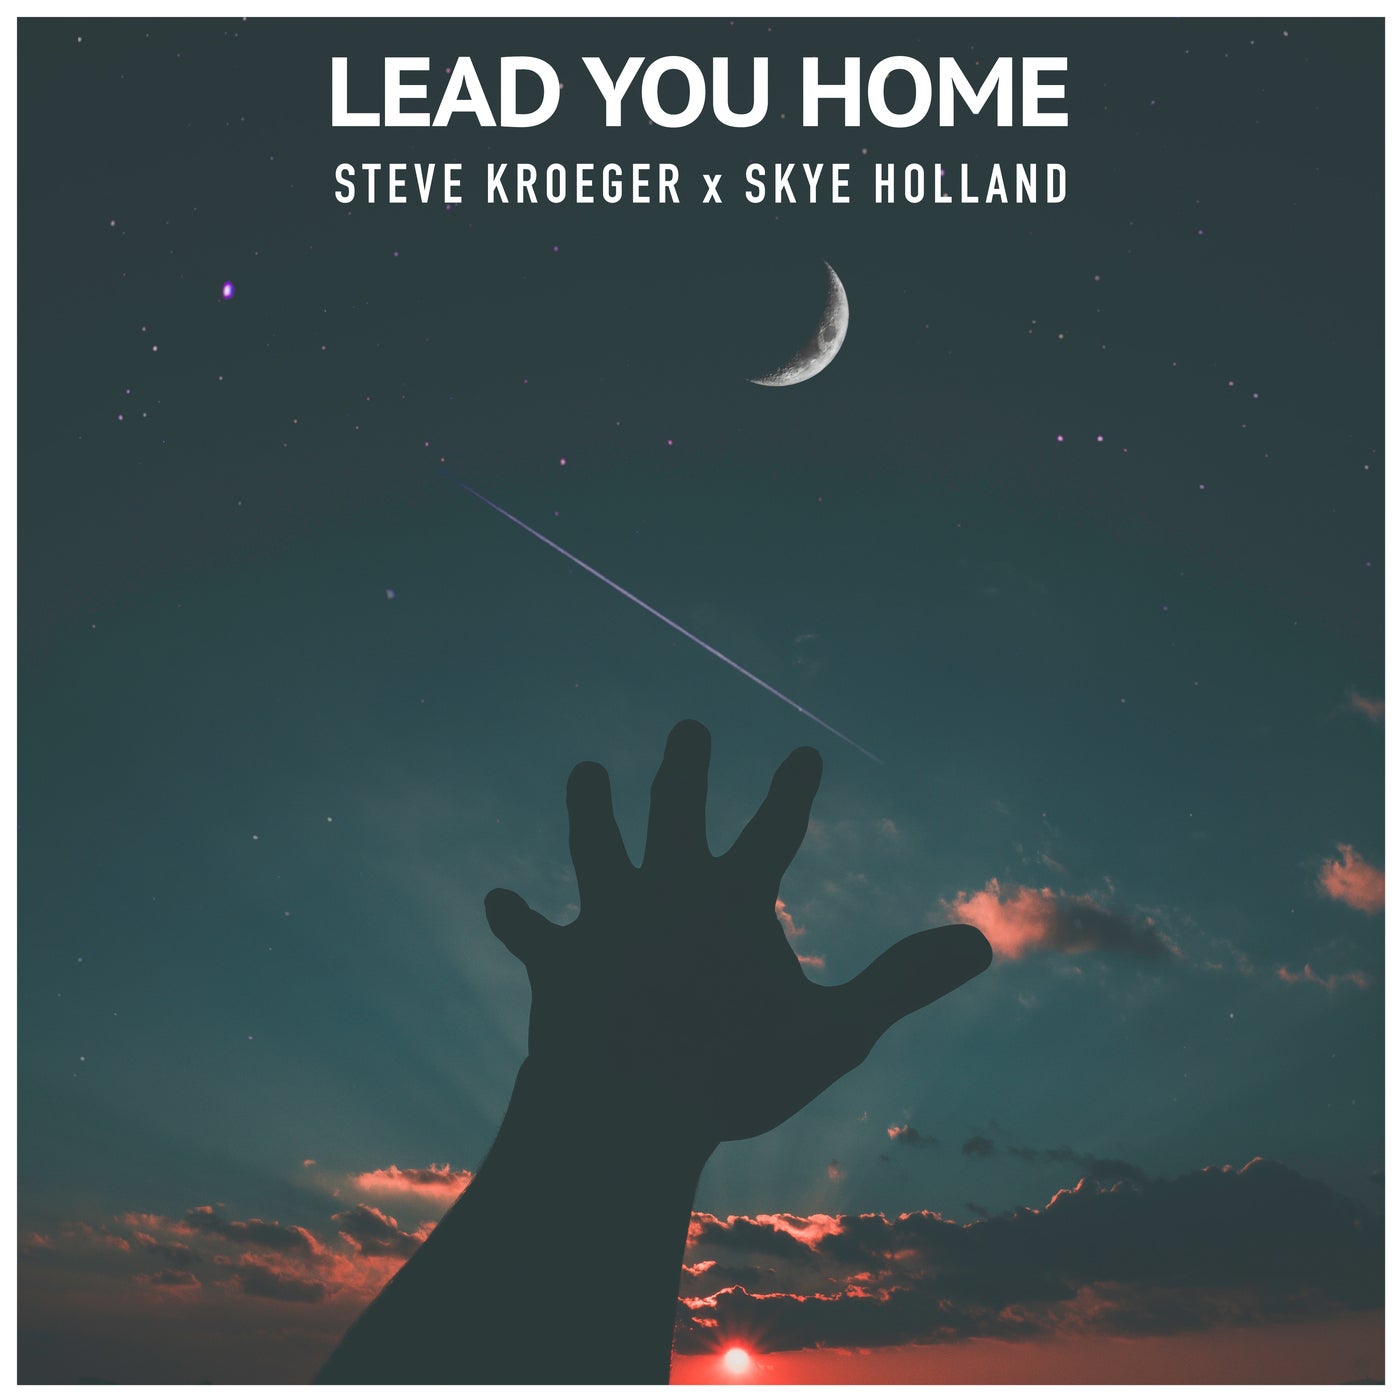 Lead You Home